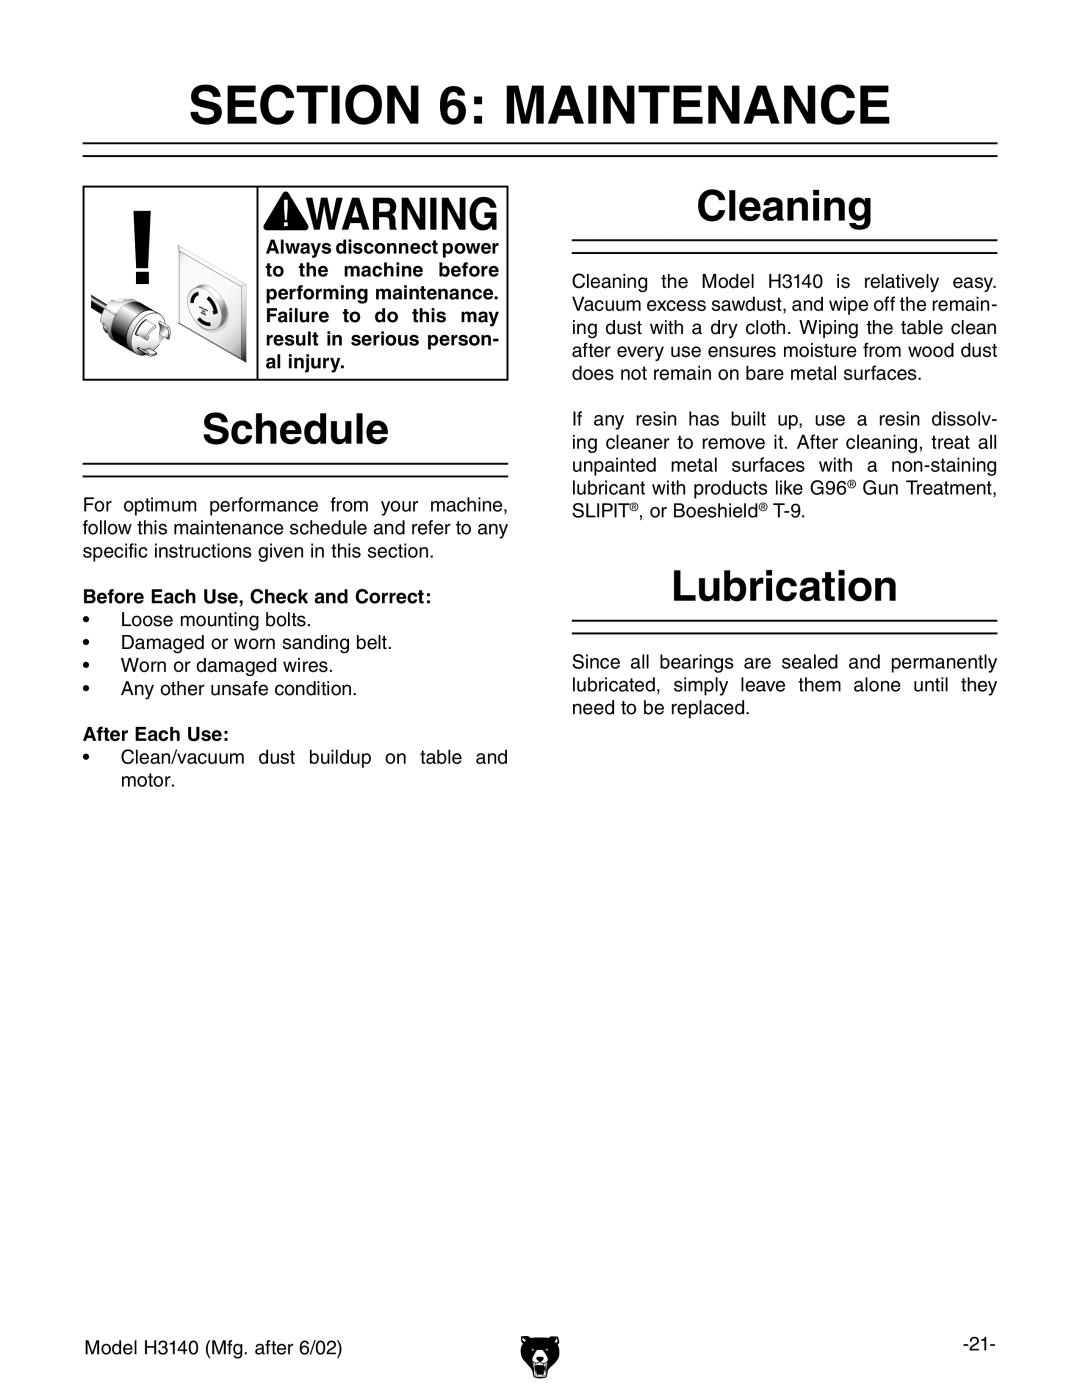 Grizzly H3140 owner manual Maintenance, Schedule, Cleaning, Lubrication 